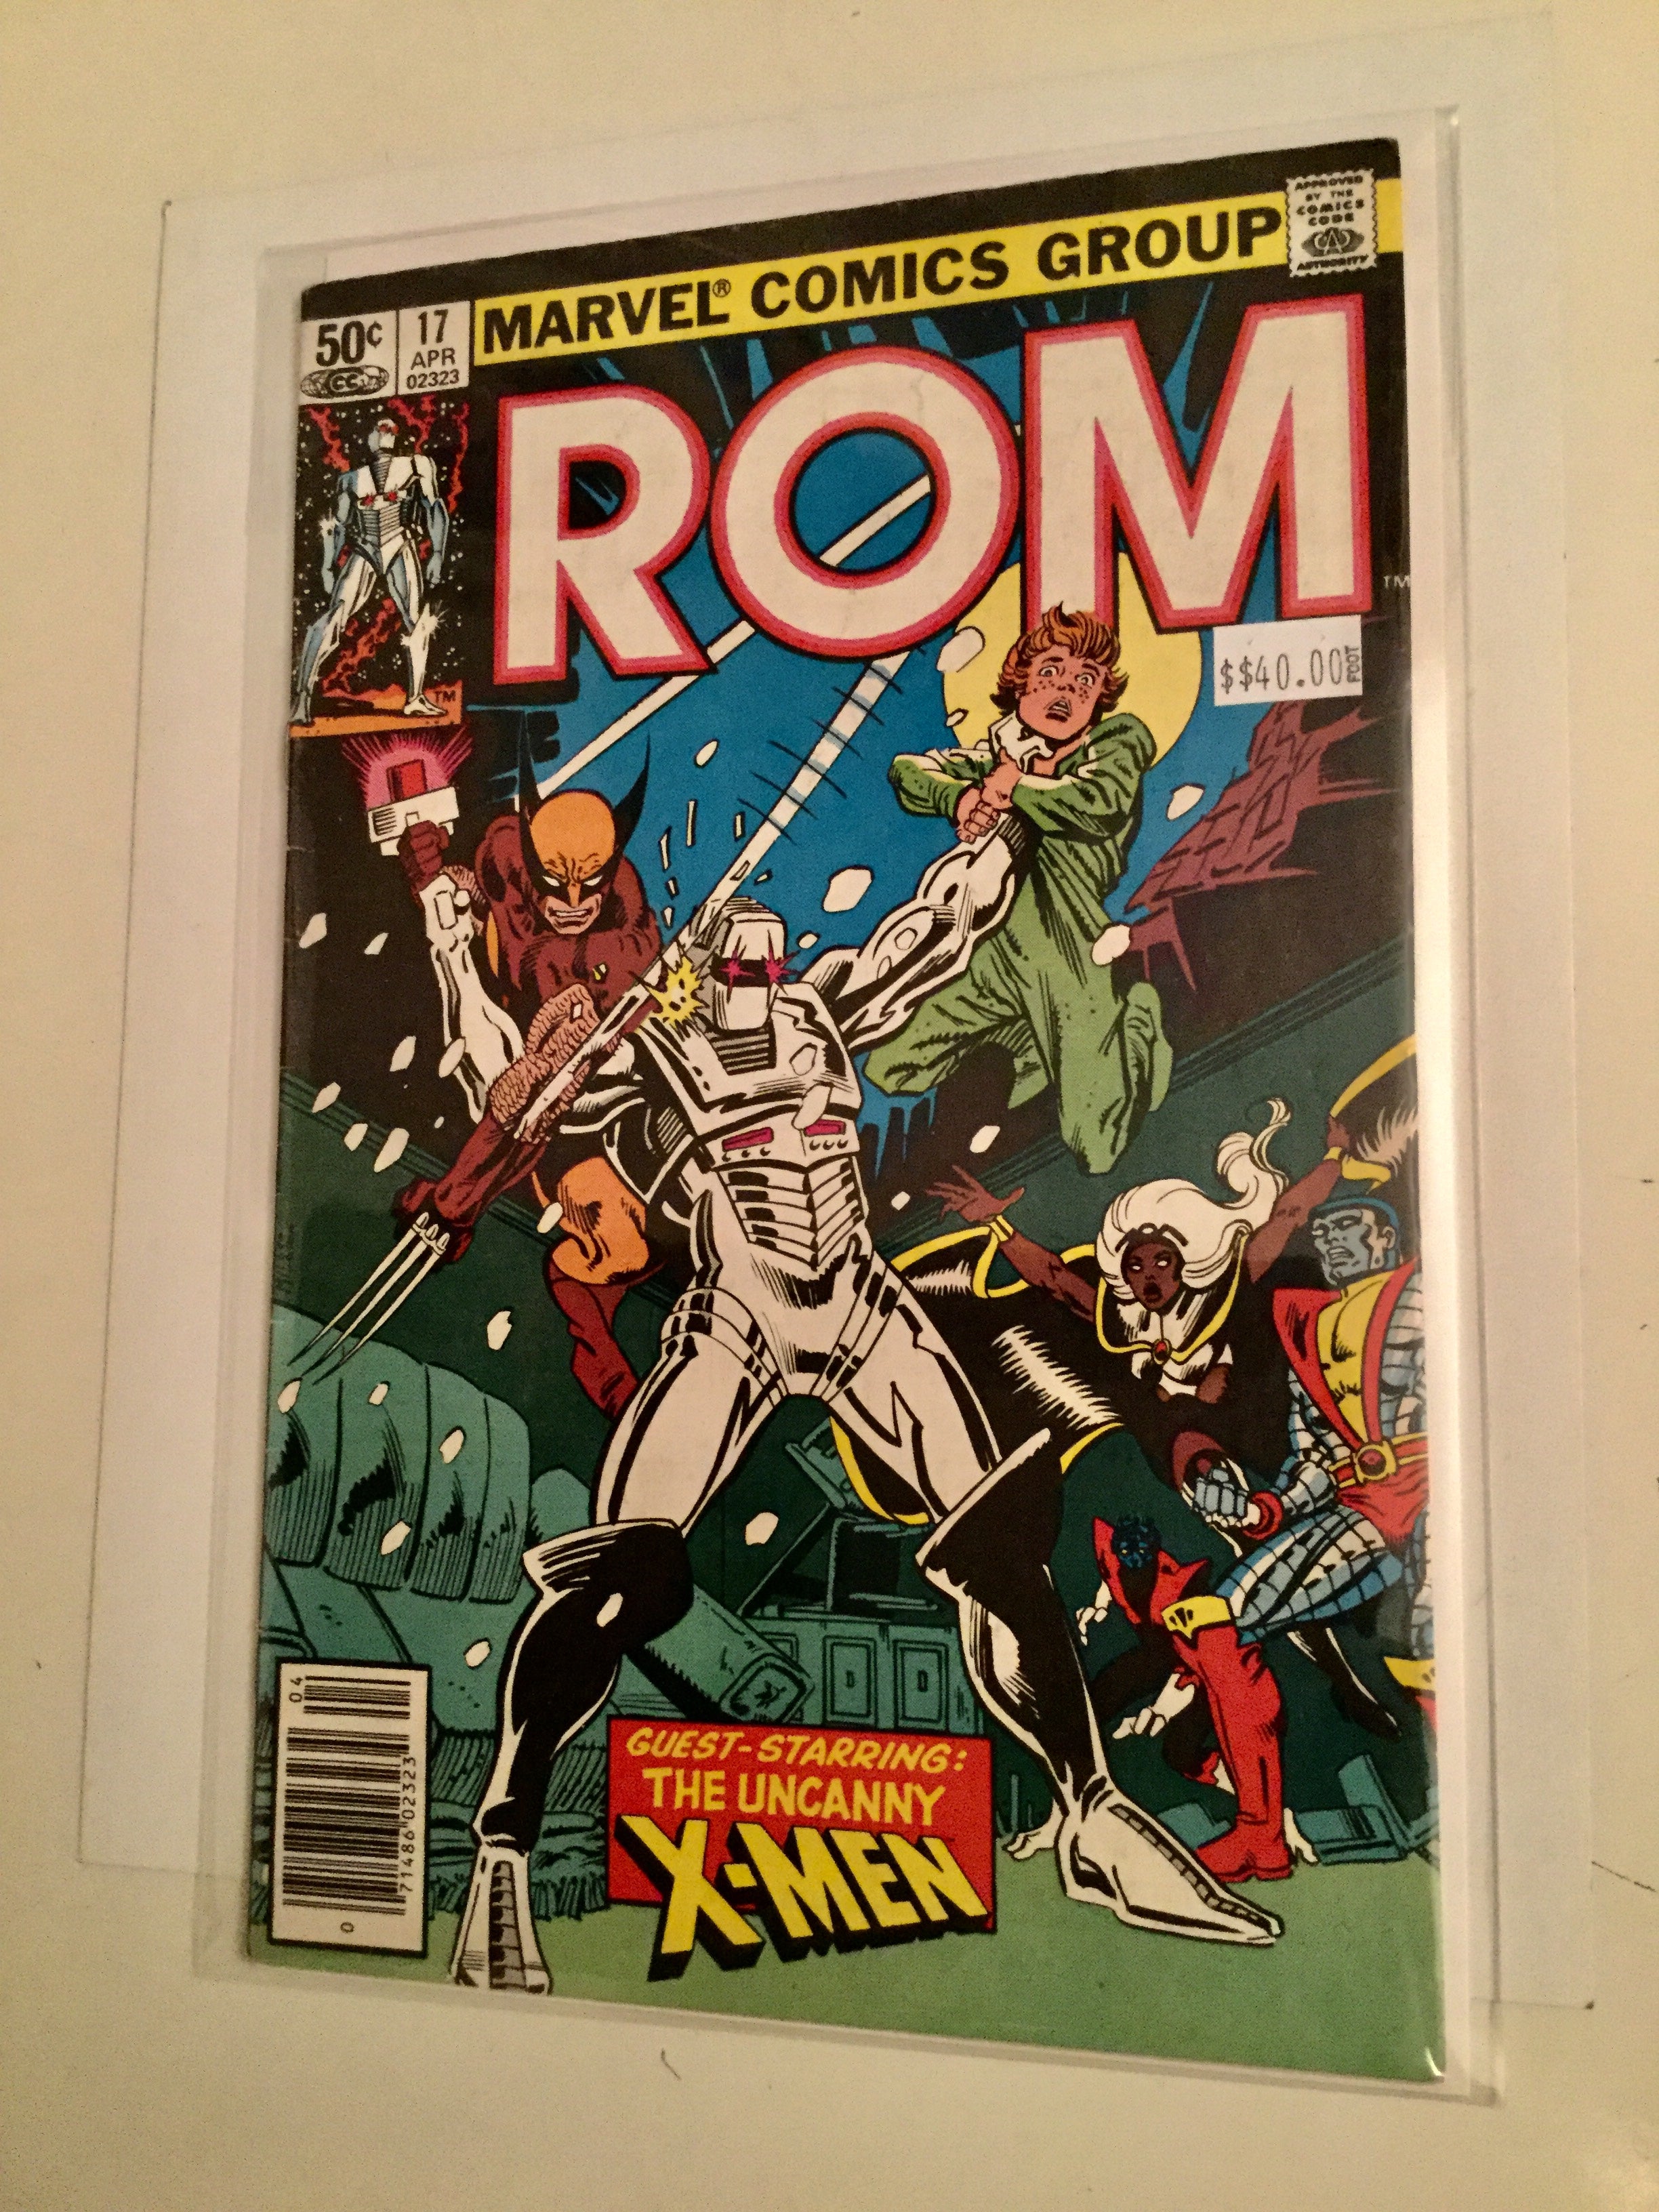 Rom #17 with the X-Men comic book